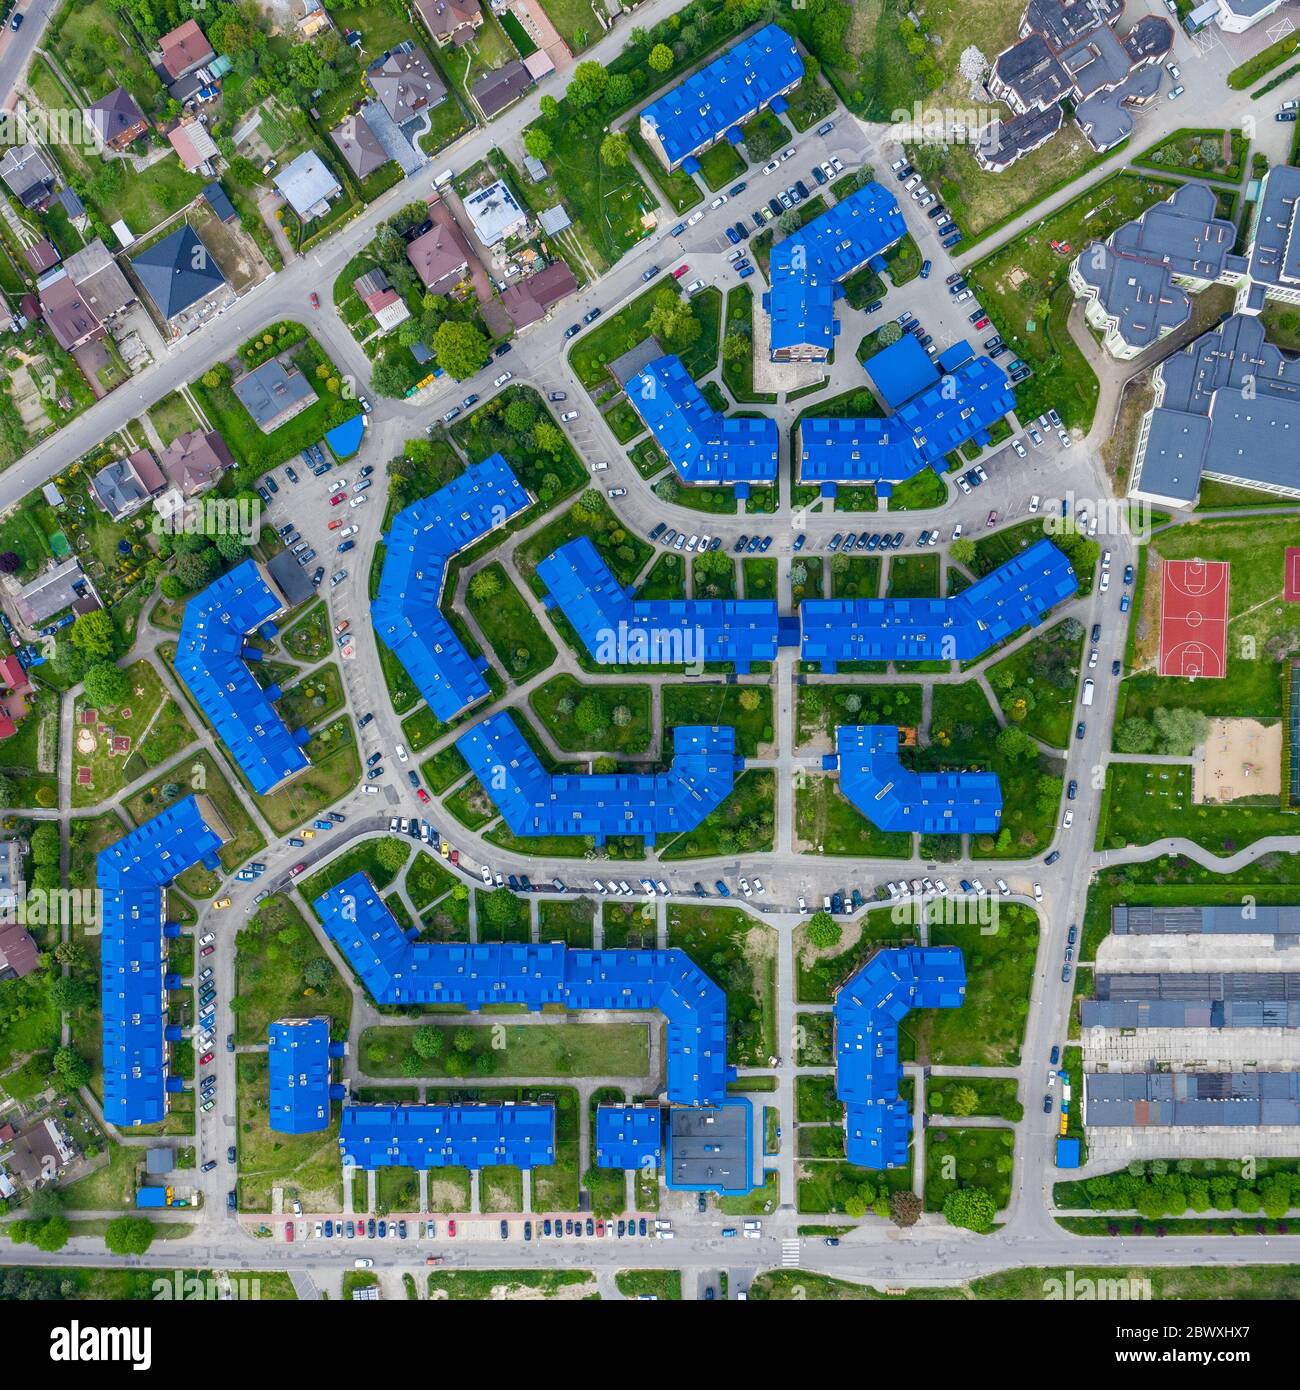 Aerial view of the housing estate with blue roofs. Estate Sloviki located in Olkusz, Poland. Stock Photo